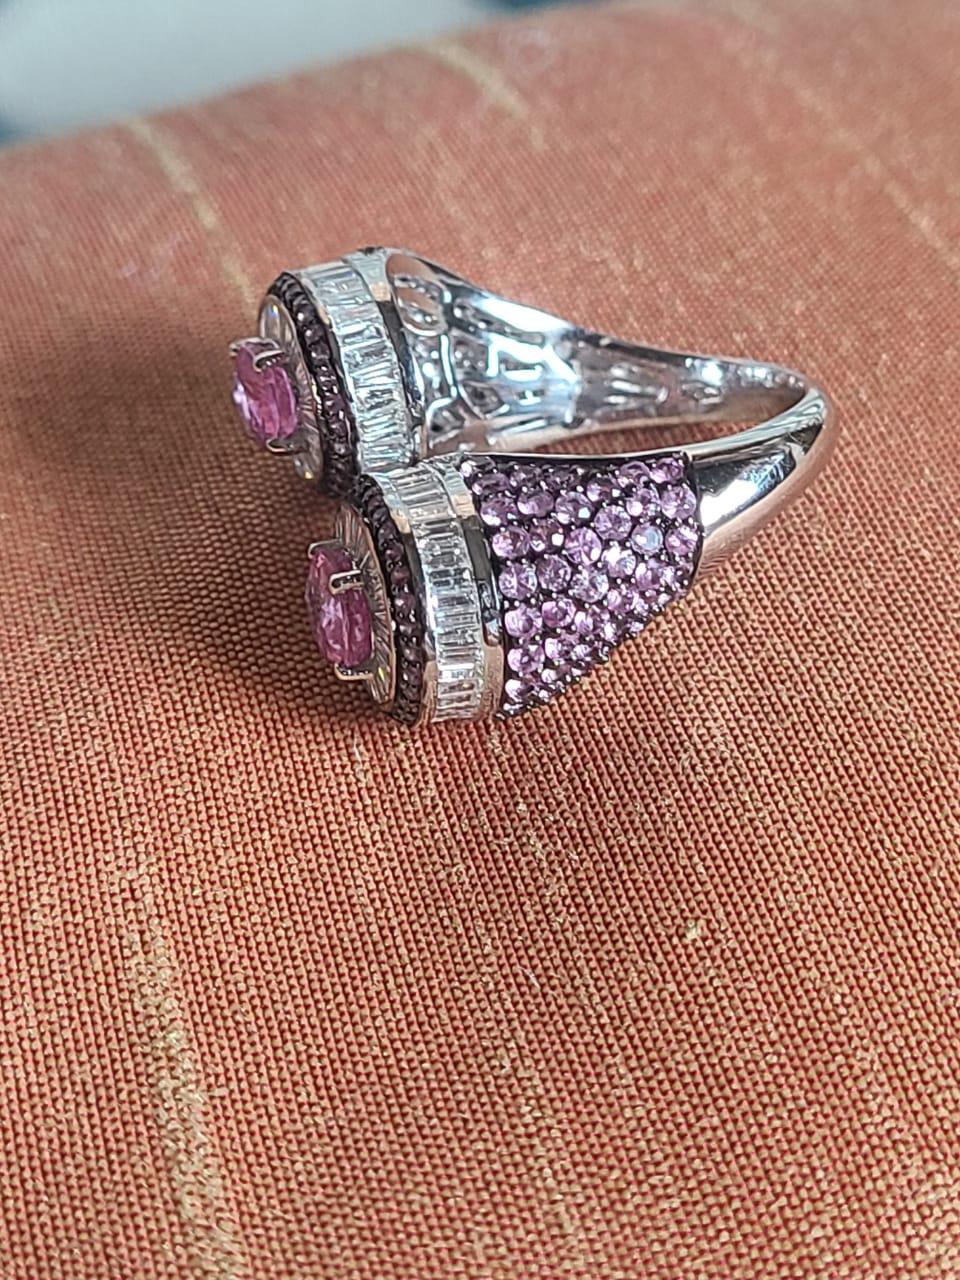 Women's or Men's Natural, Pink Sapphires & Diamonds Cocktail Ring Set in 18K White Gold